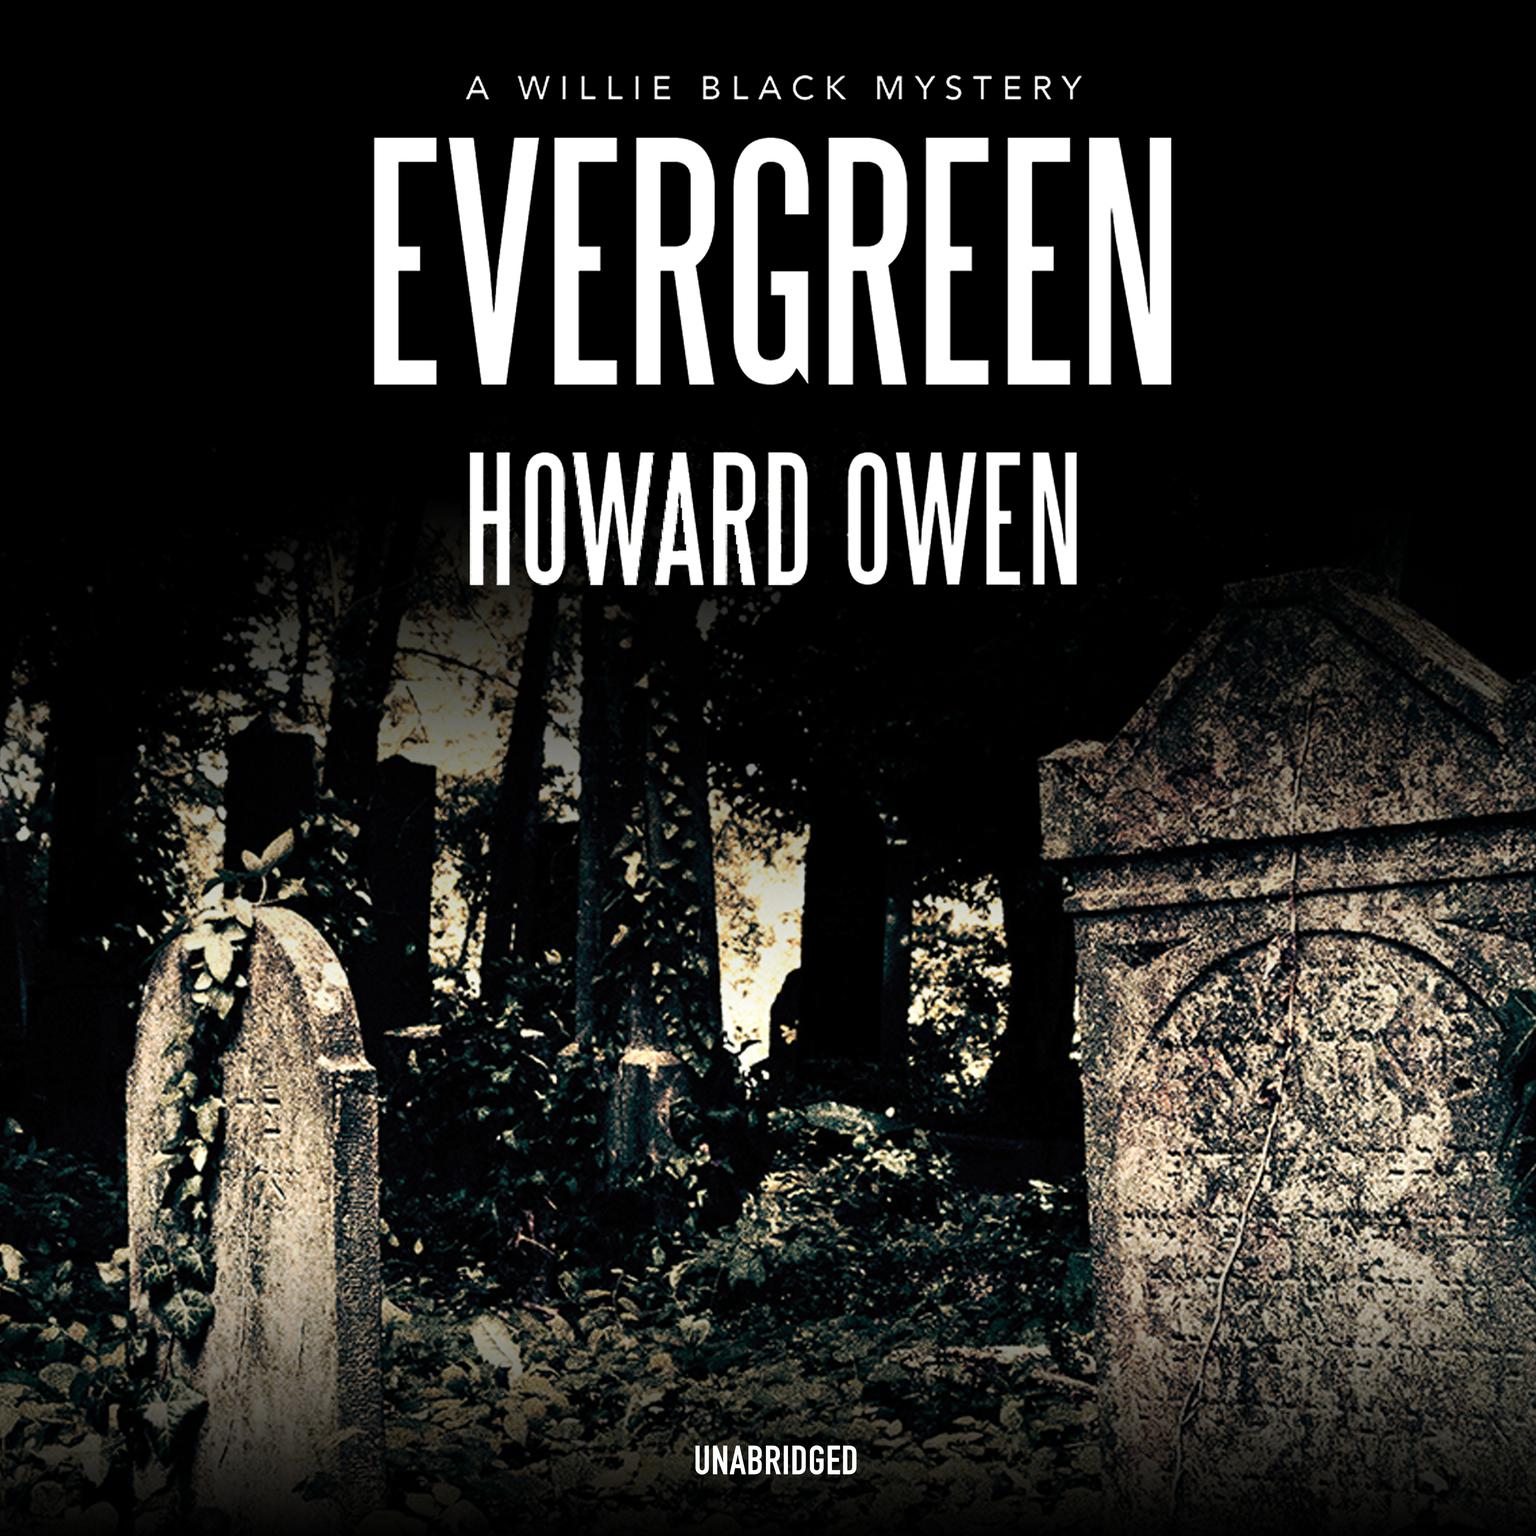 Evergreen: A Willie Black Mystery Audiobook, by Howard Owen